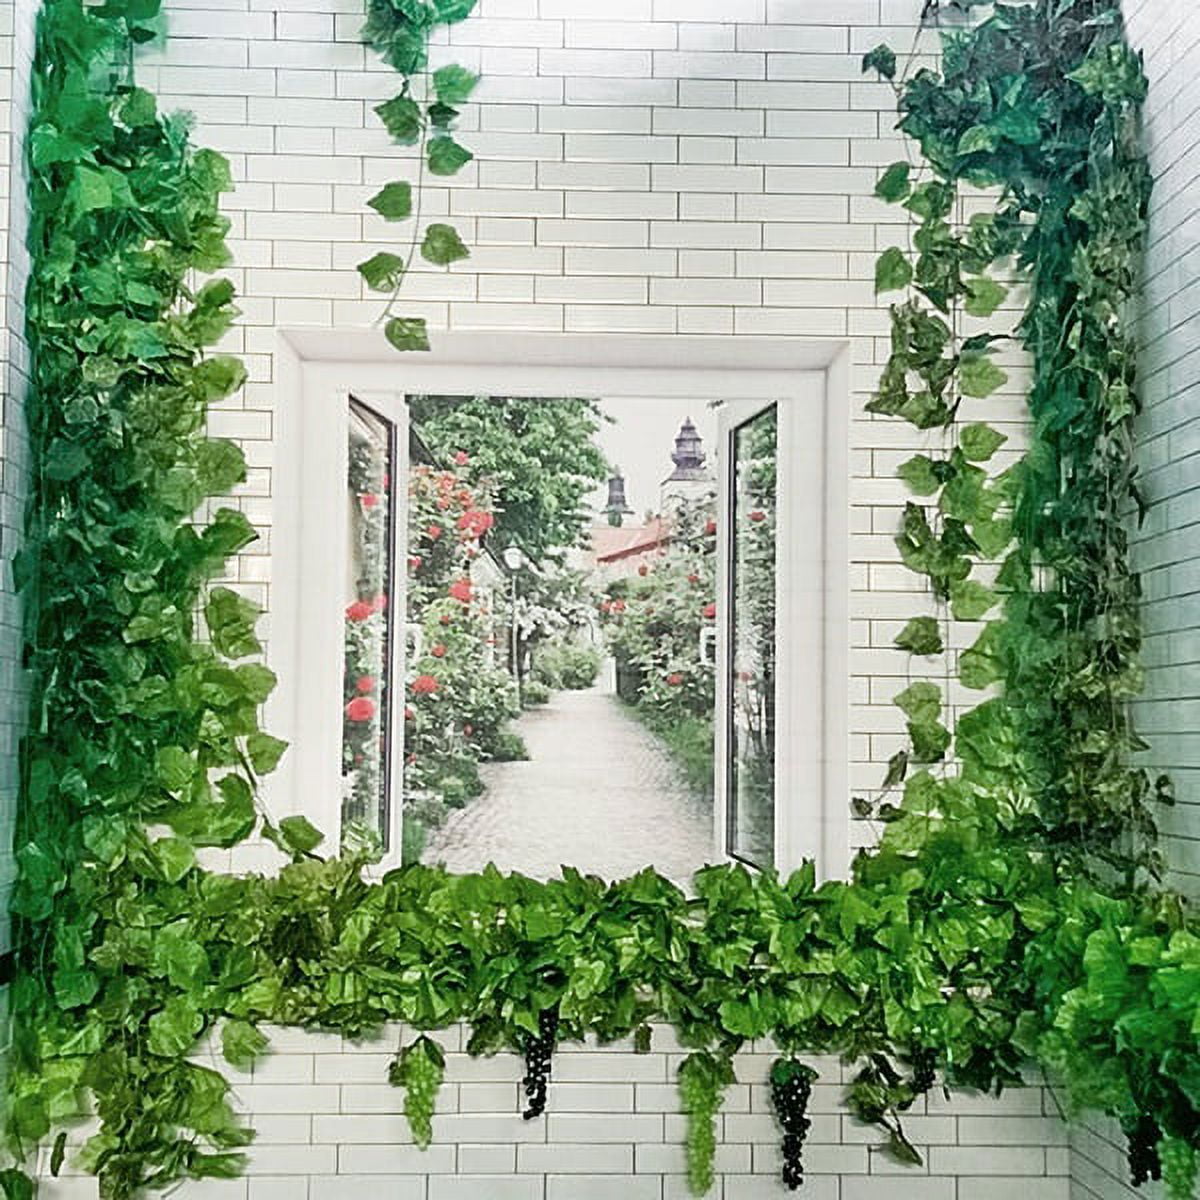 1/12pcs Artificial Green Ivy Plant, Wall Hanging Ivy Vine, Fake